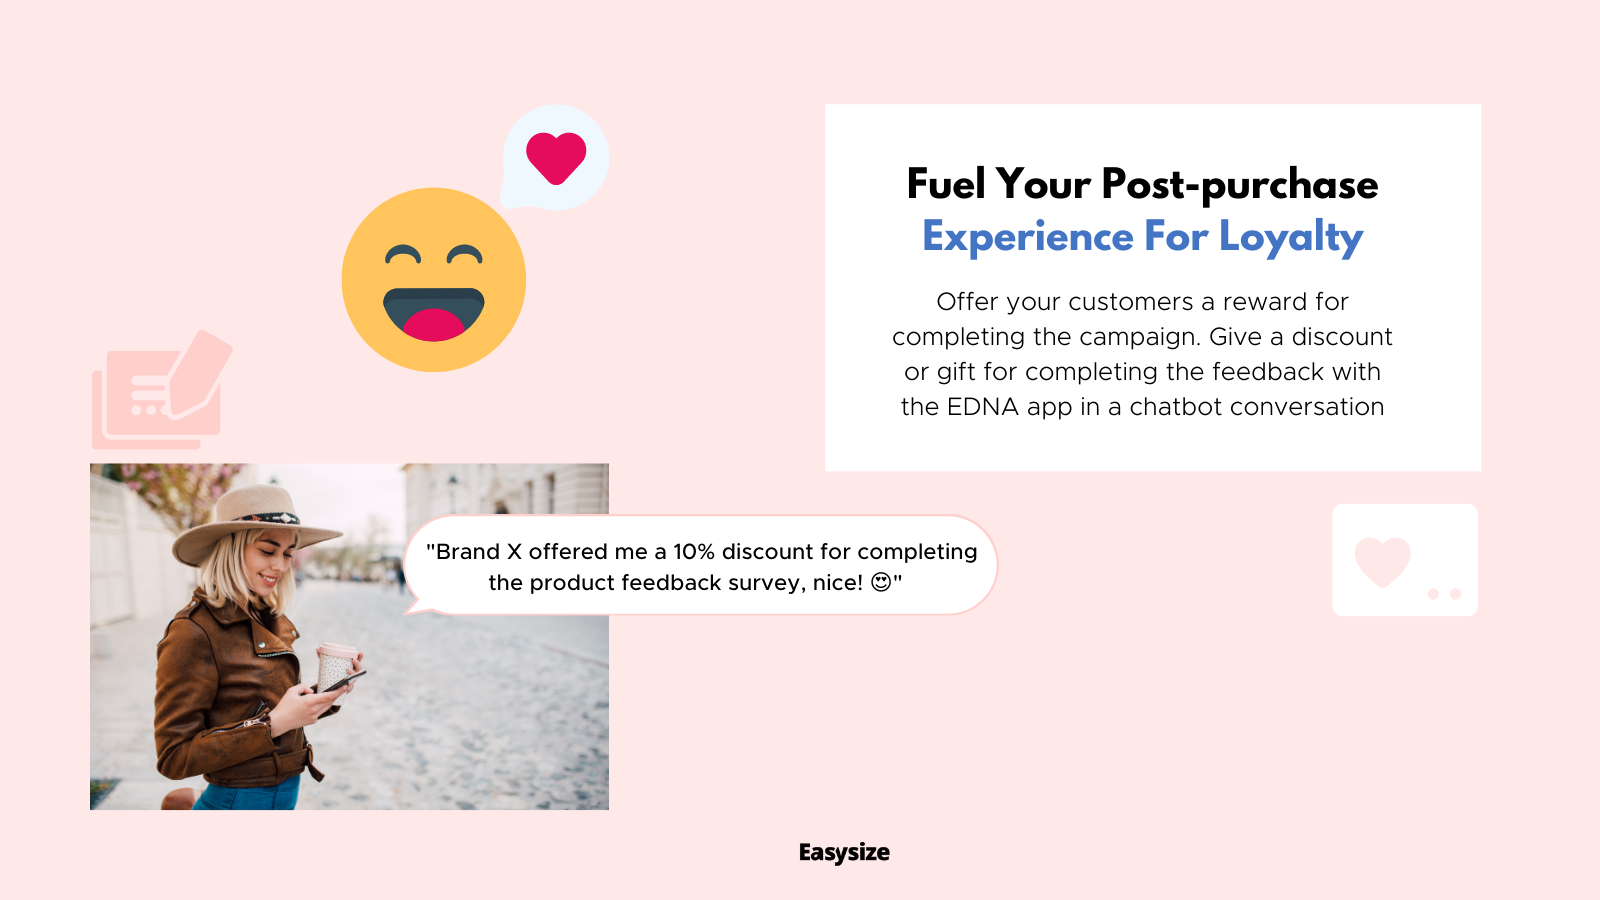 Fuel Your Post-purchase Experience For Loyalty